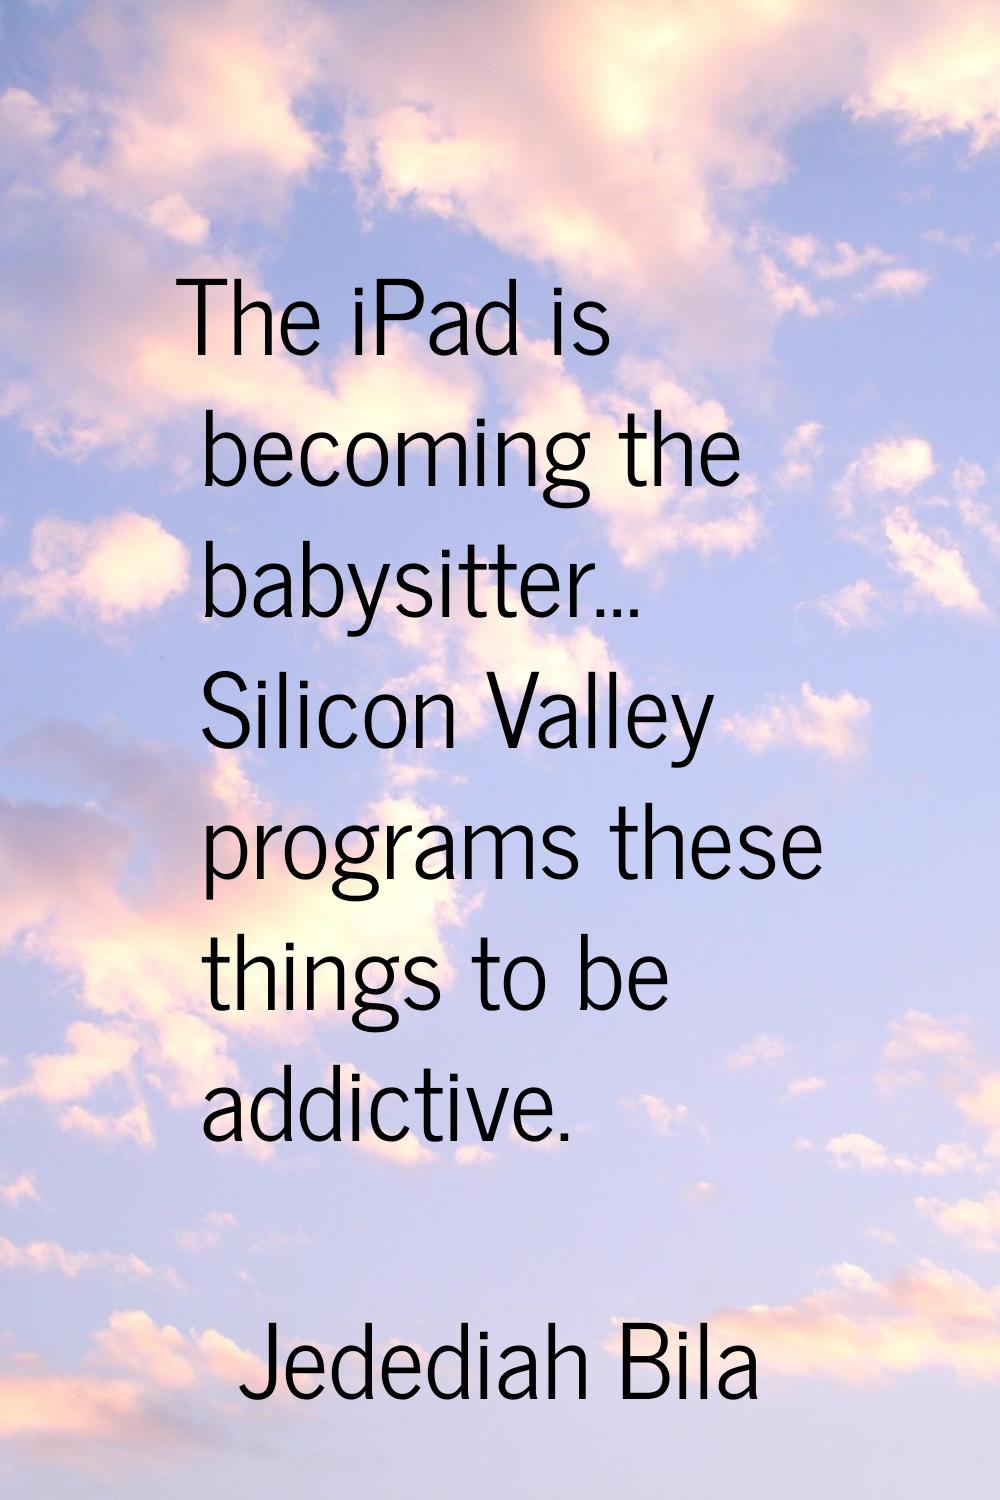 The iPad is becoming the babysitter… Silicon Valley programs these things to be addictive.